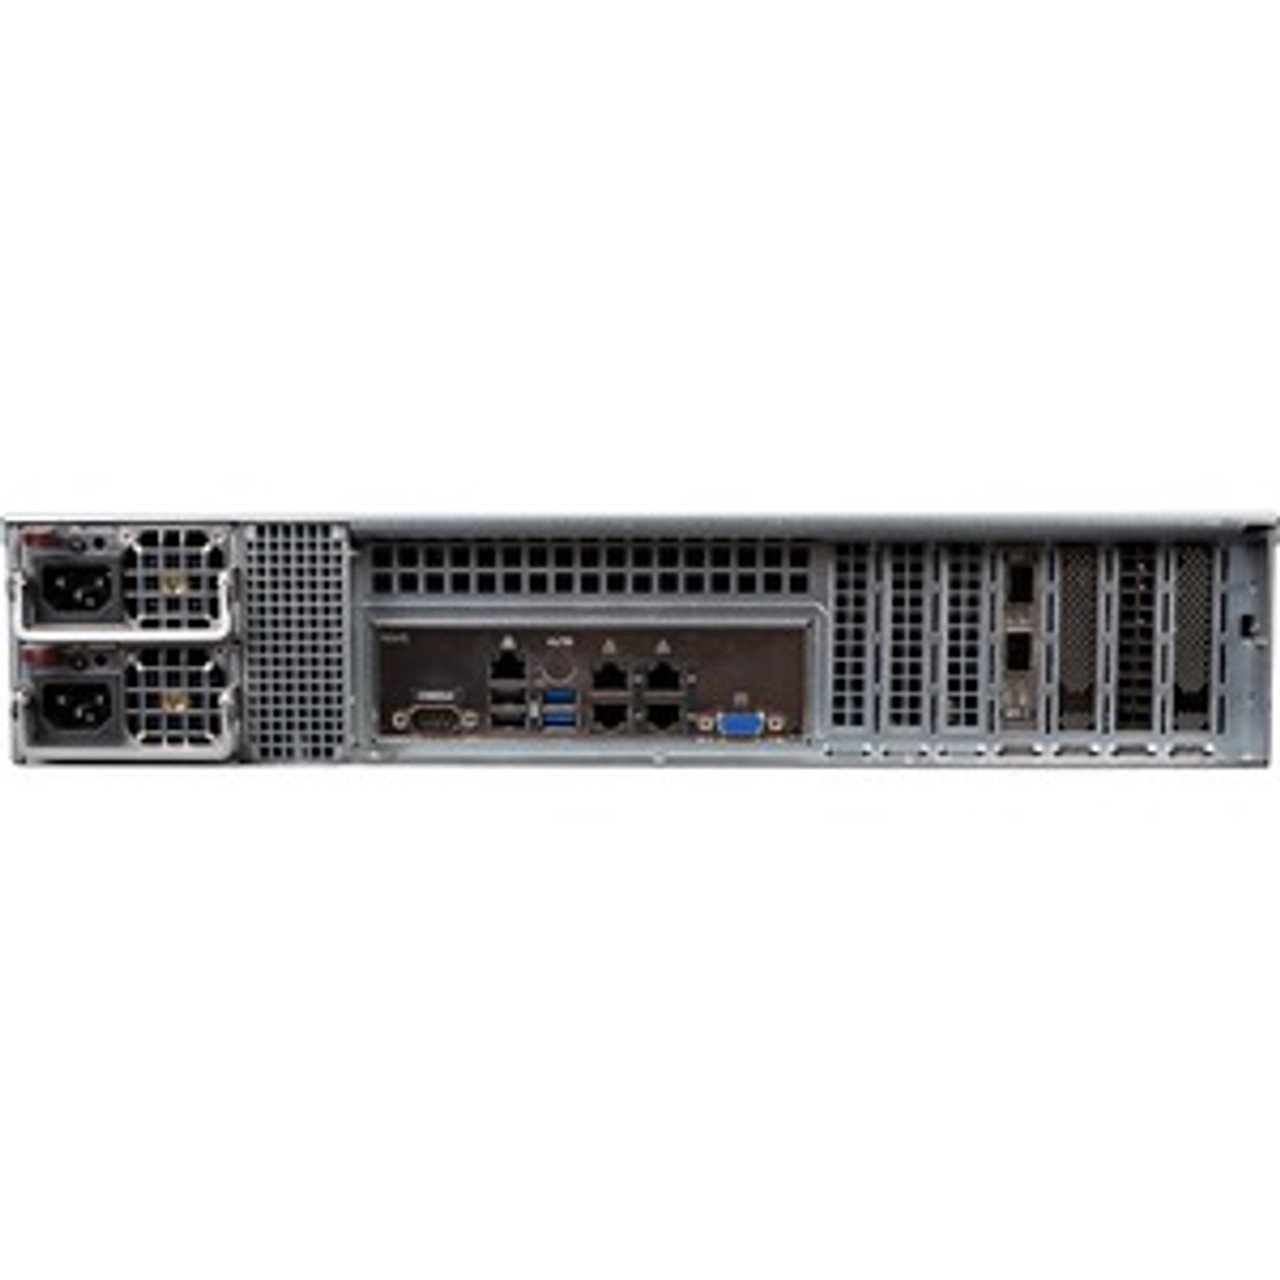 Fortinet FortiManager FMG-2000E Centralized Managment/Log/Analysis Appliance - FMG-2000E-BDL-447-36